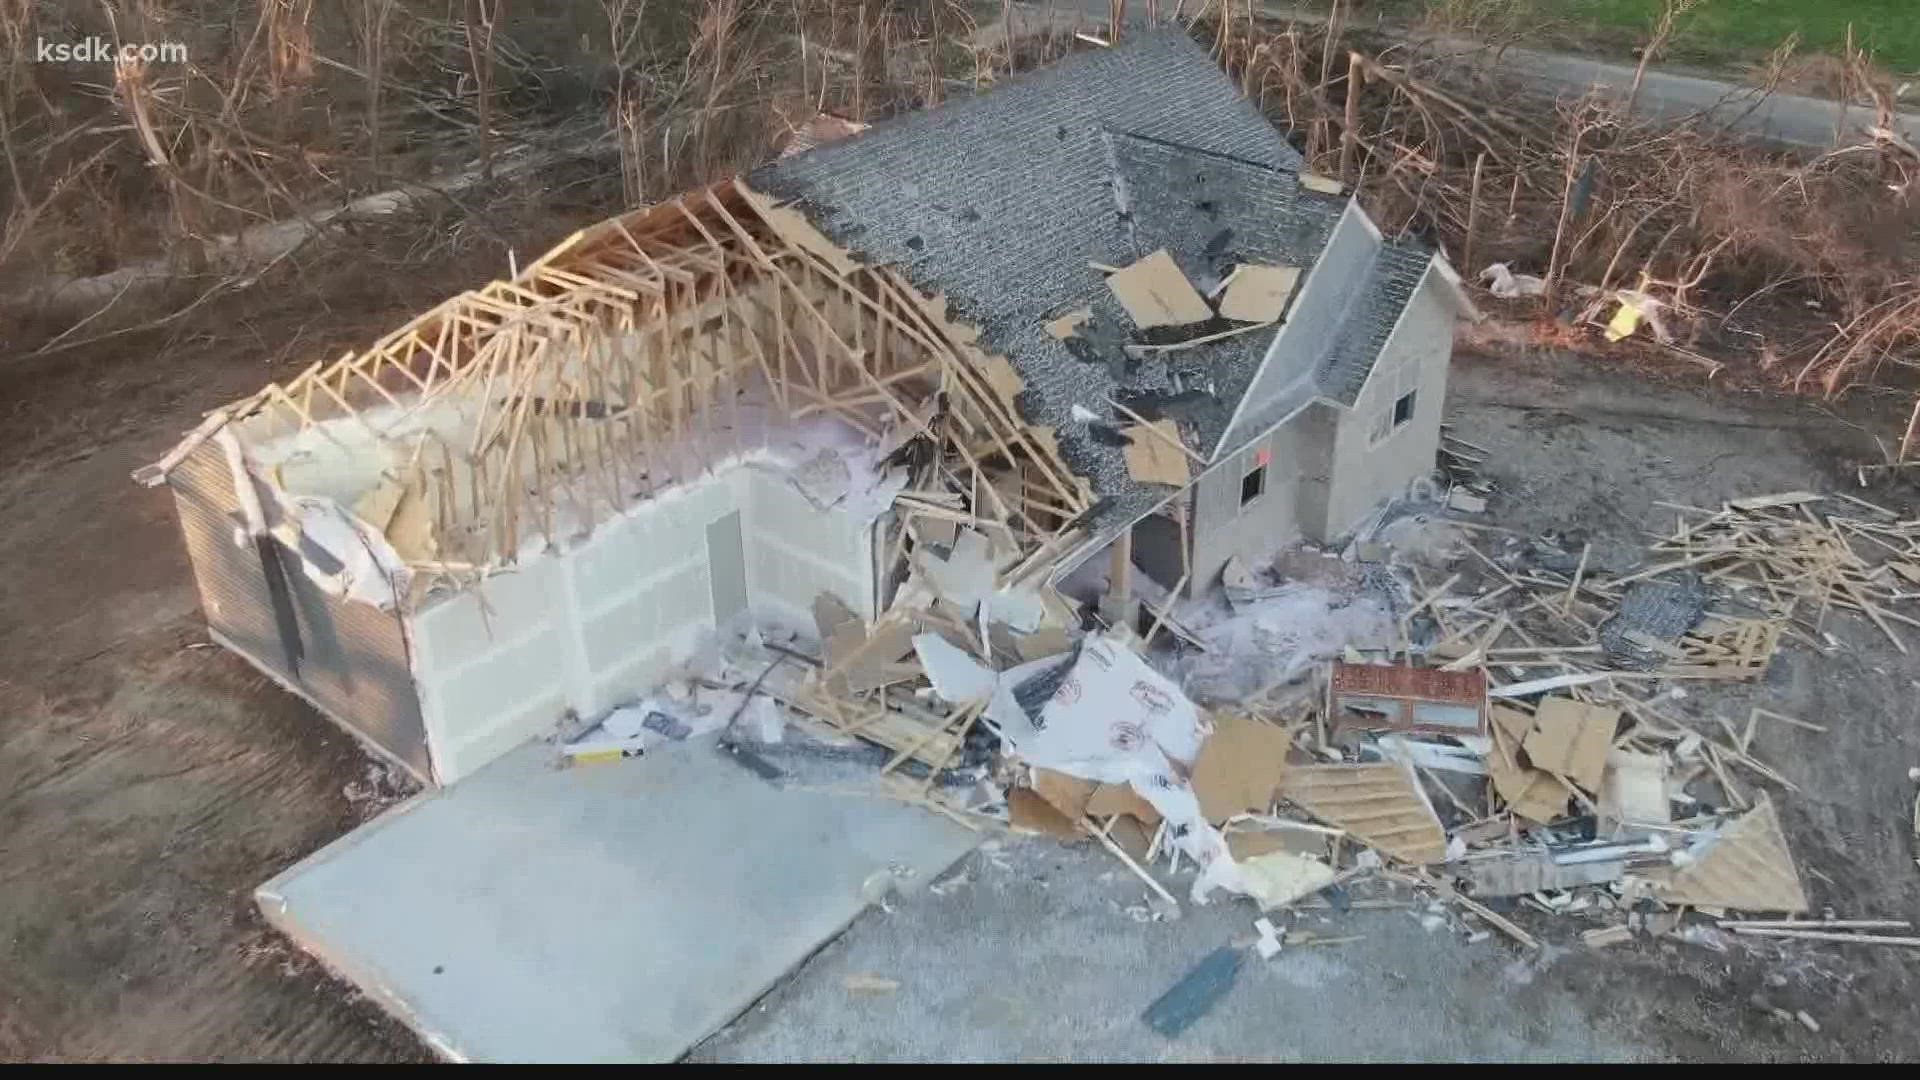 Officials say as many as 25 homes were damaged near Defiance.